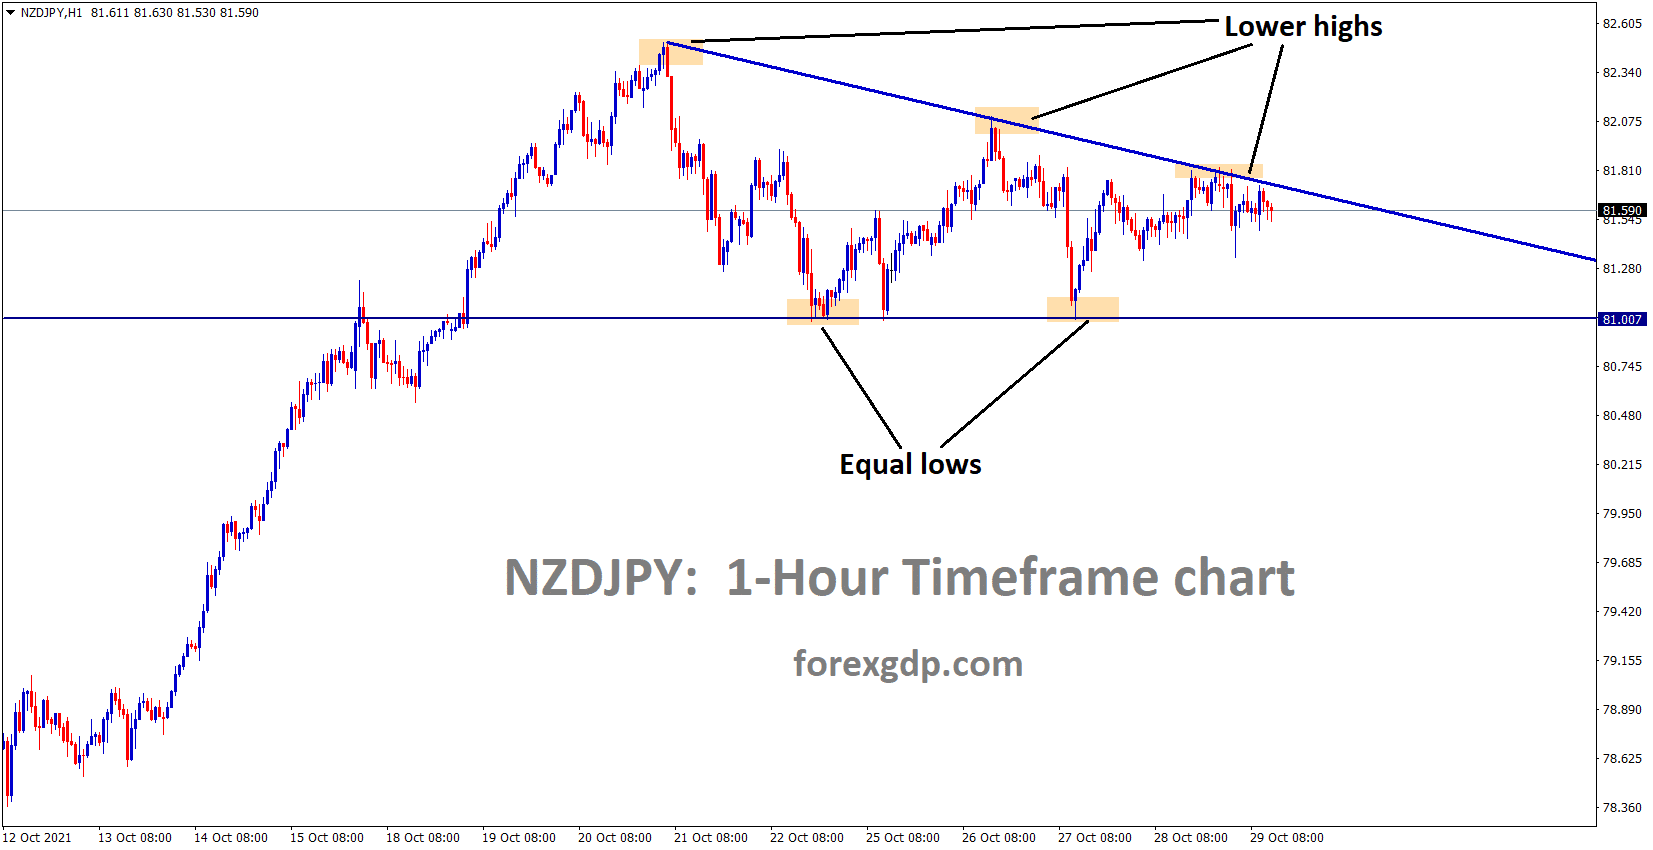 NZDJPY is moving in the Descending traingle pattern and the market gets narrower.